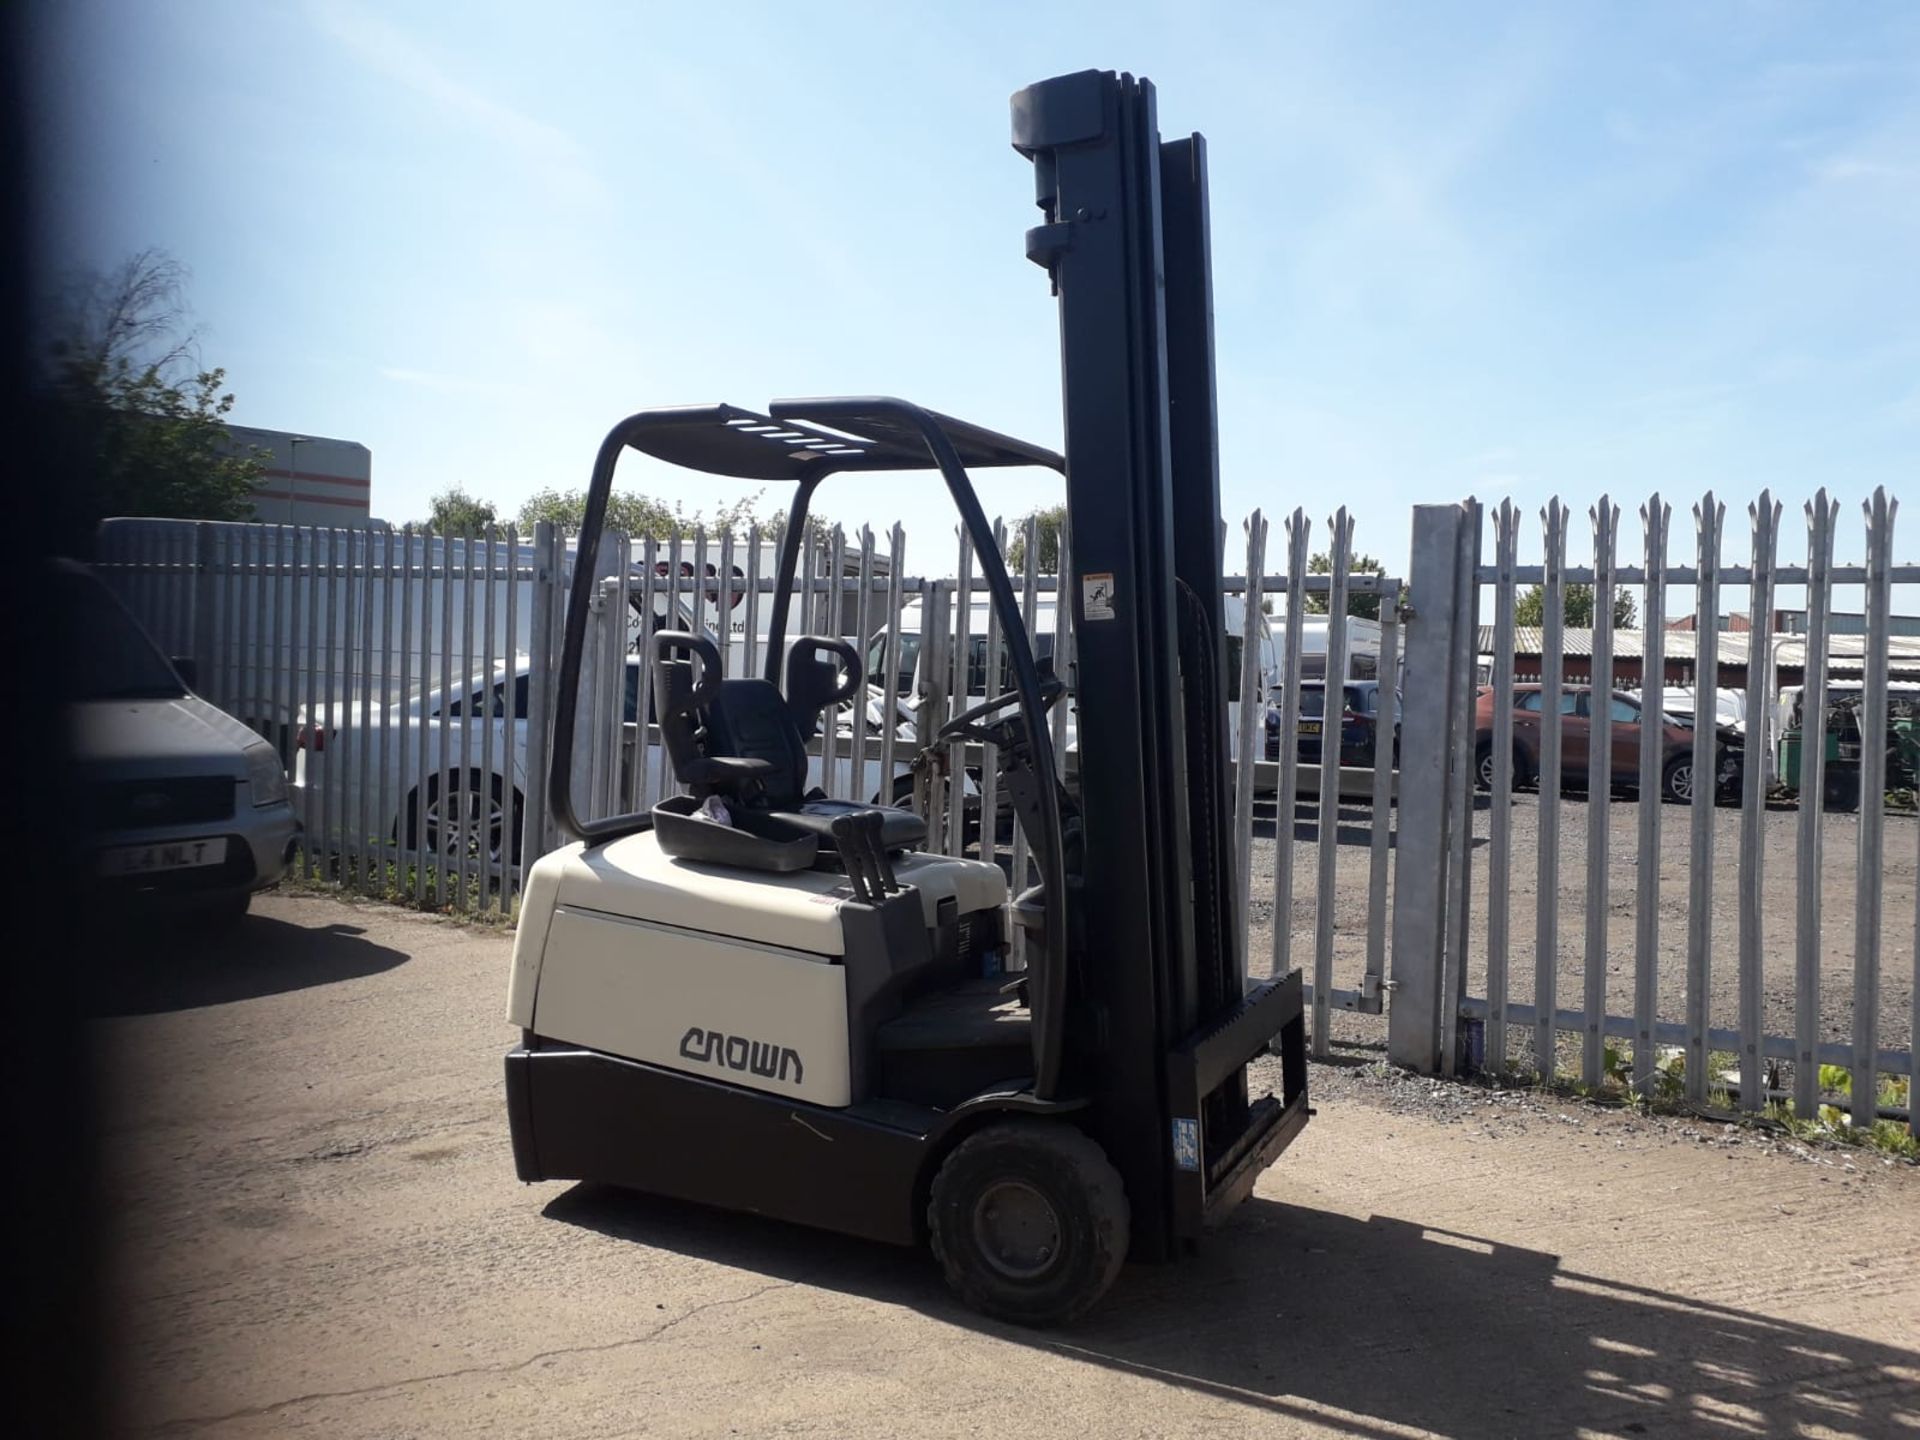 Crown 3 Wheel Electric Forklift - Image 7 of 7